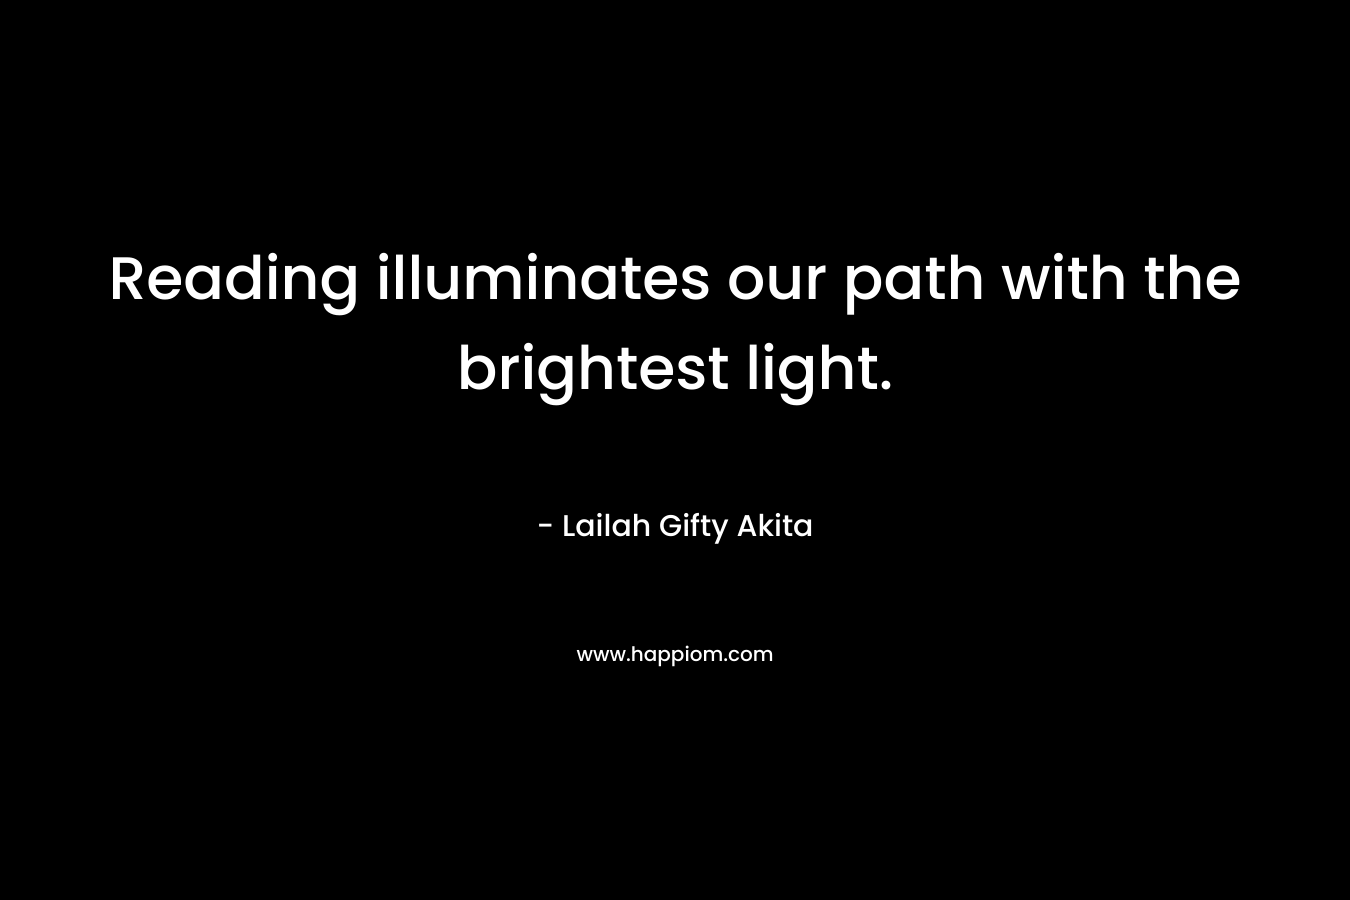 Reading illuminates our path with the brightest light.